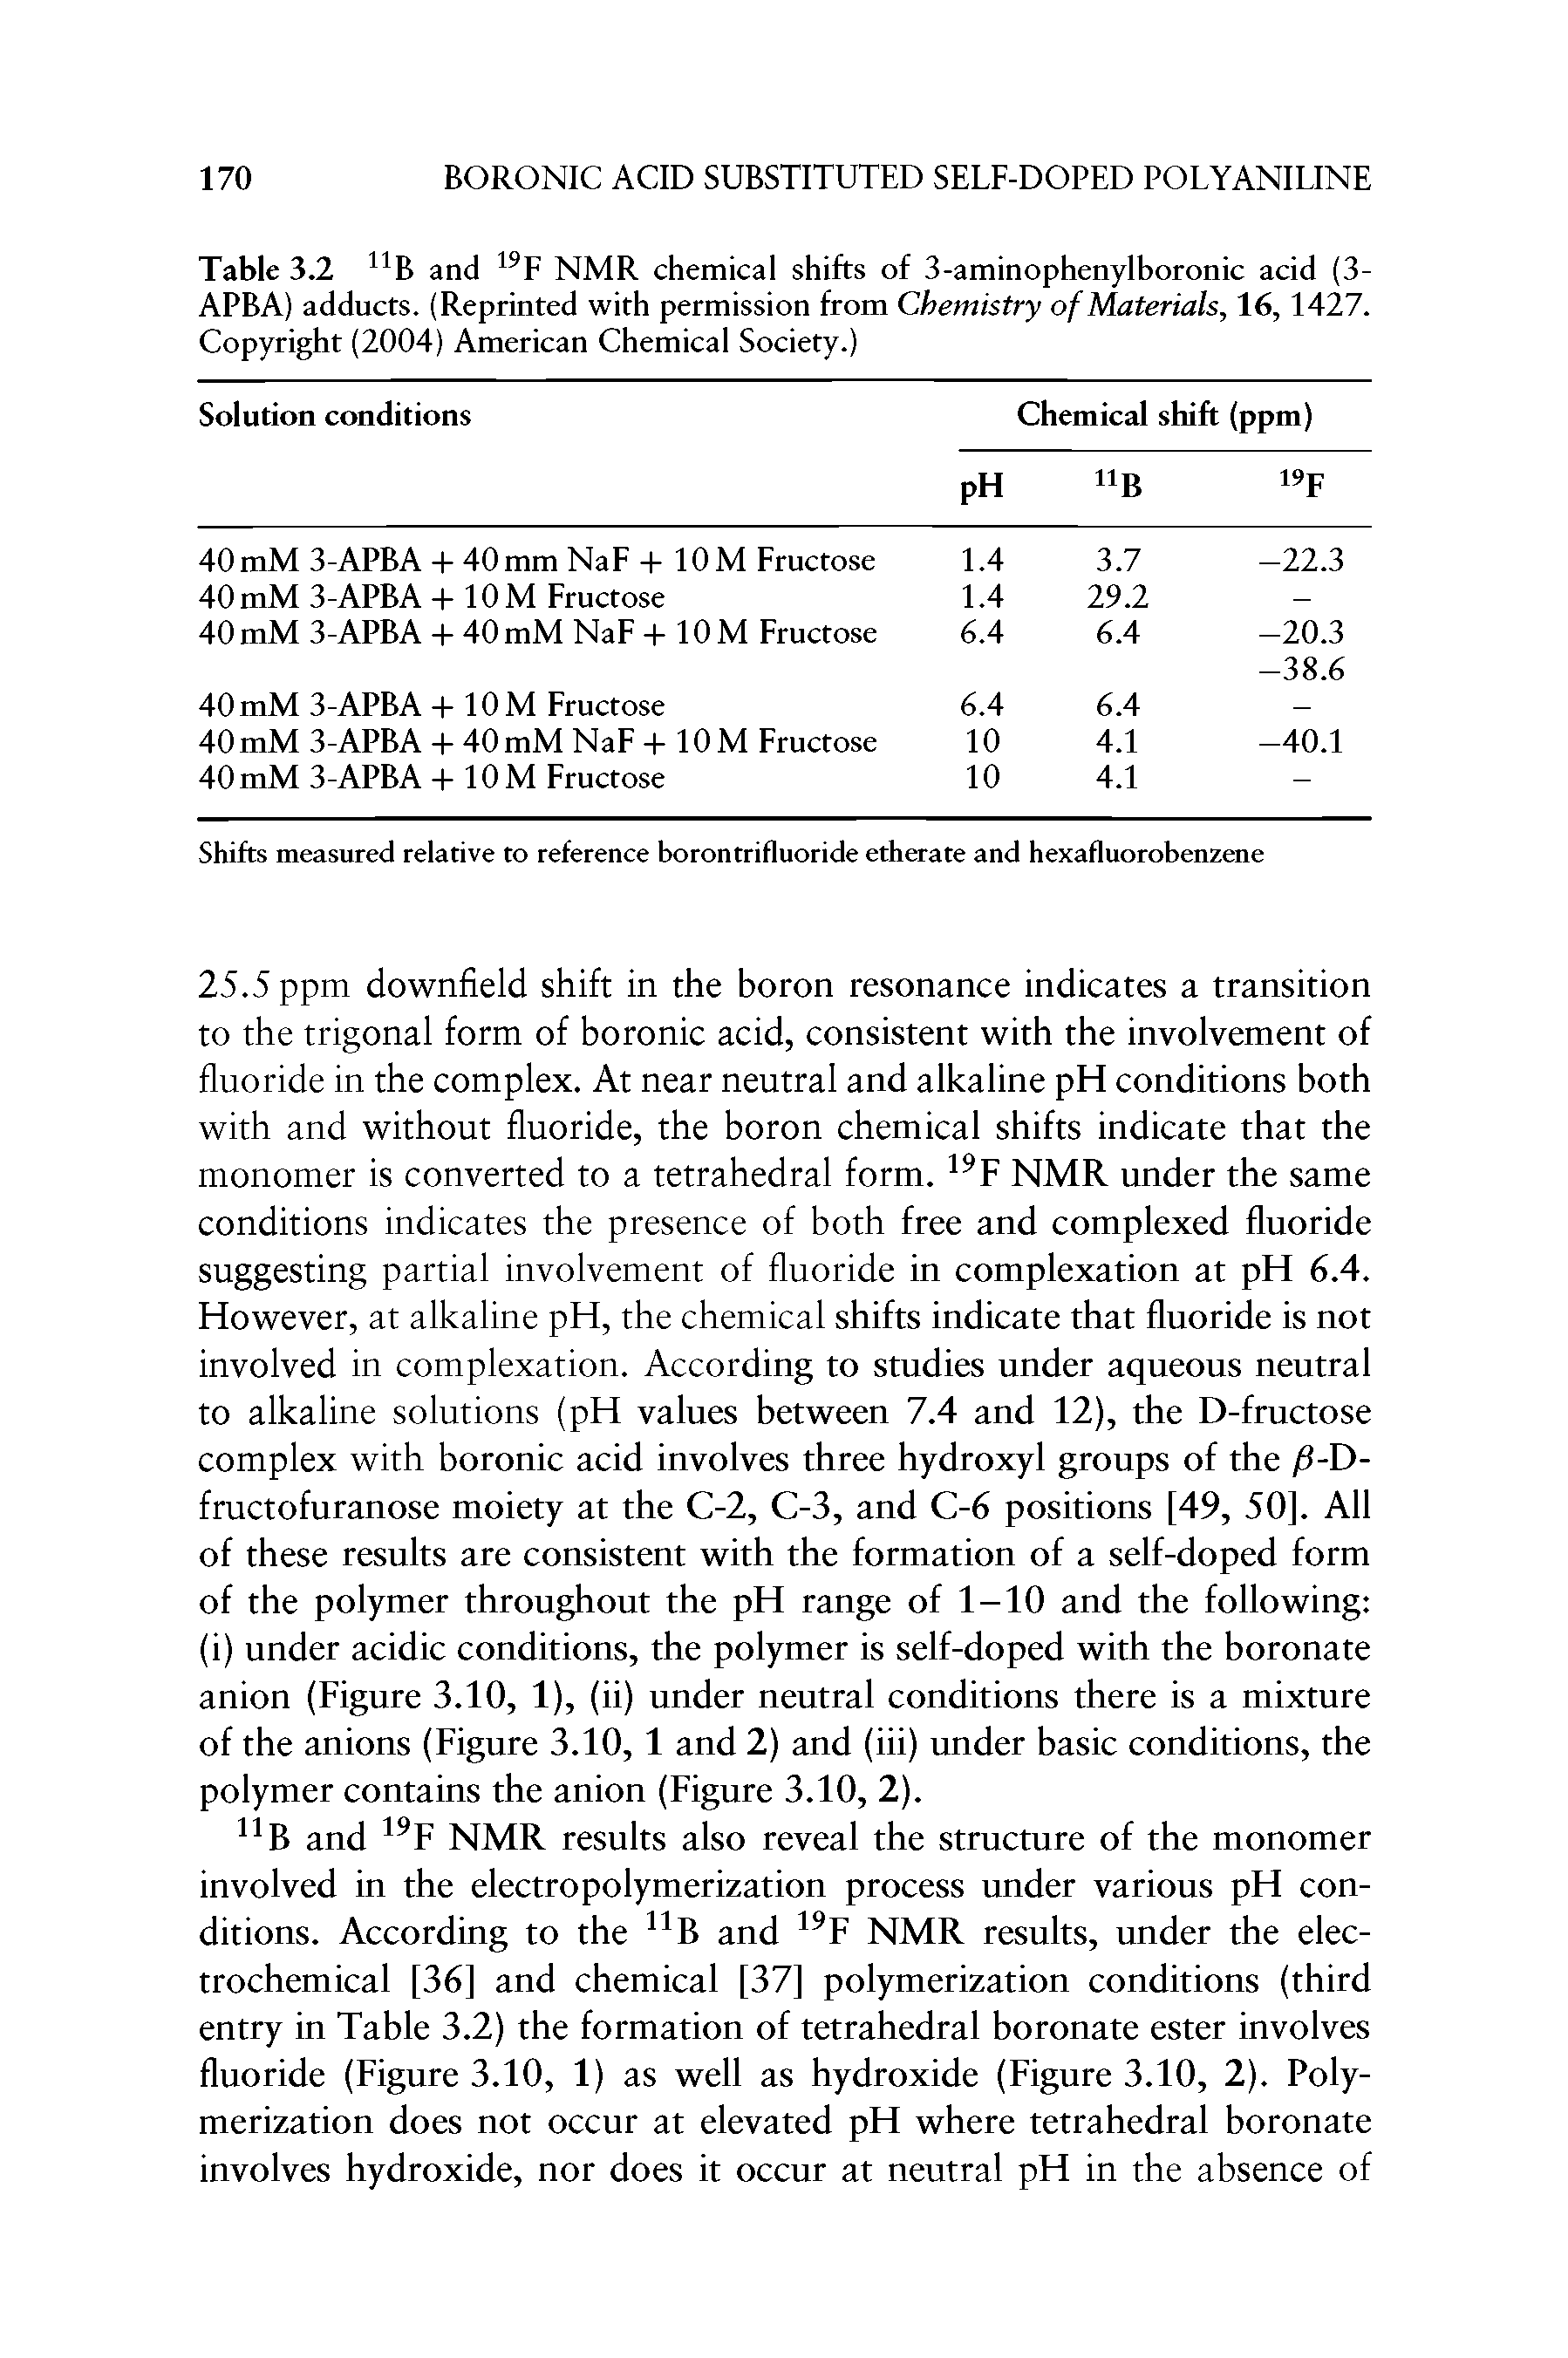 Table 3.2 B and NMR chemical shifts of 3-aminophenylboronic acid (3-APBA) adducts. (Reprinted with permission from Chemistry of Materials, 16,1427. Copyright (2004) American Chemical Society.)...